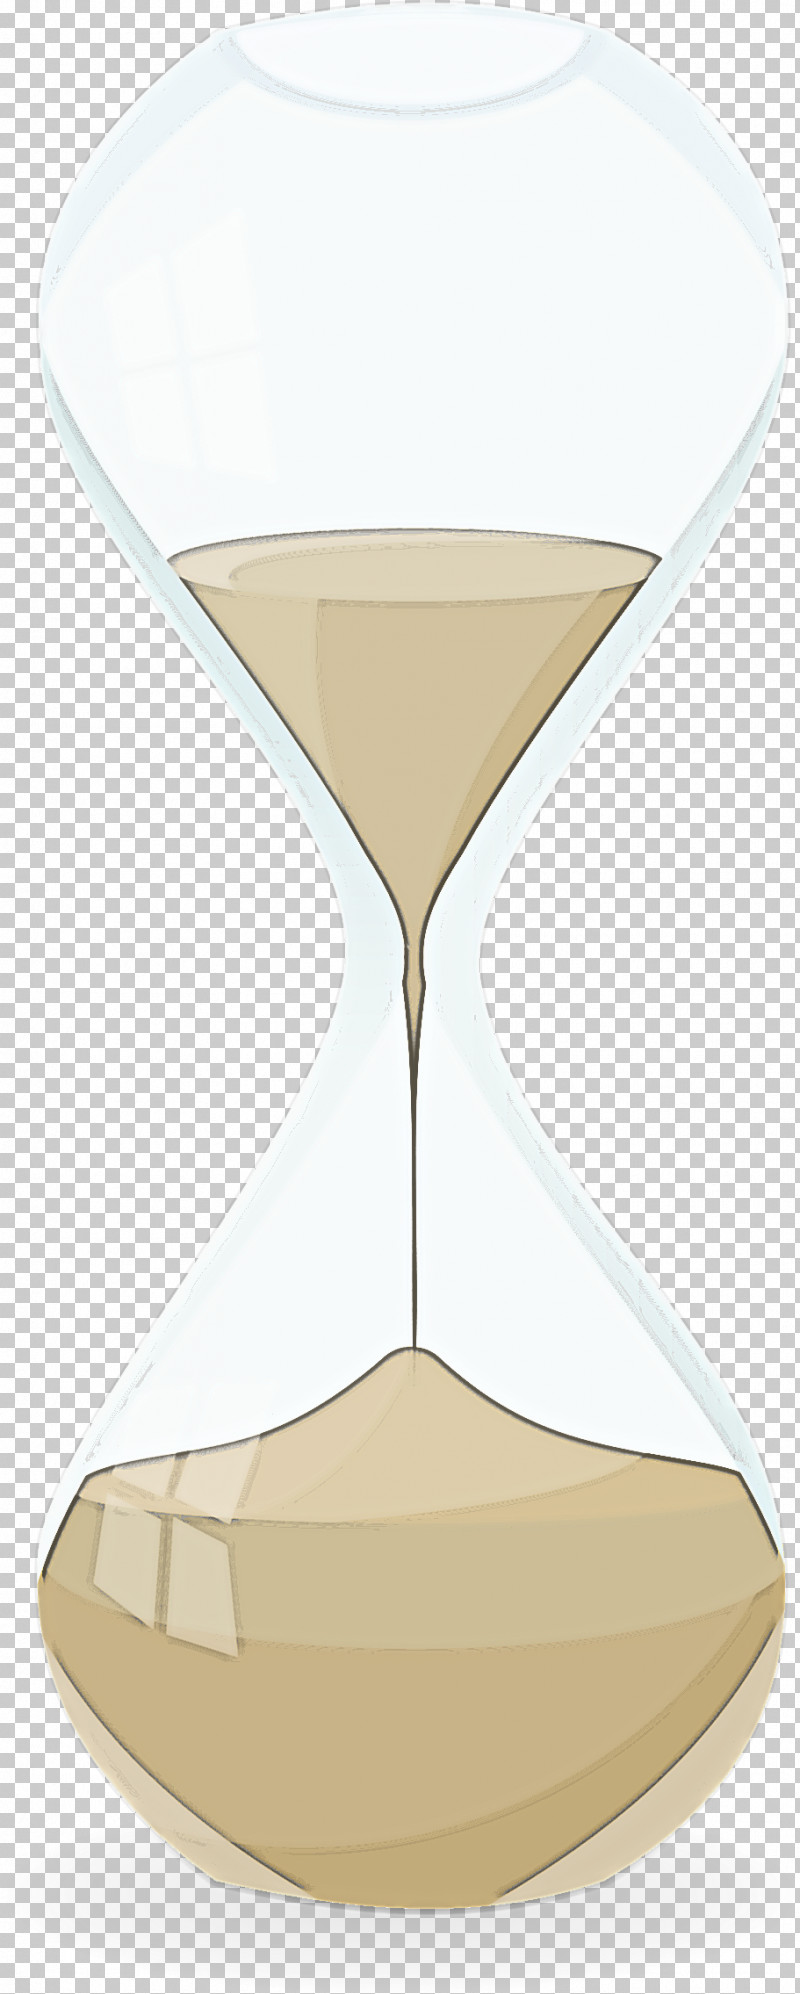 Martini Glass Hourglass Drink Drinkware Stemware PNG, Clipart, Alexander, Champagne Stemware, Classic Cocktail, Cocktail, Distilled Beverage Free PNG Download